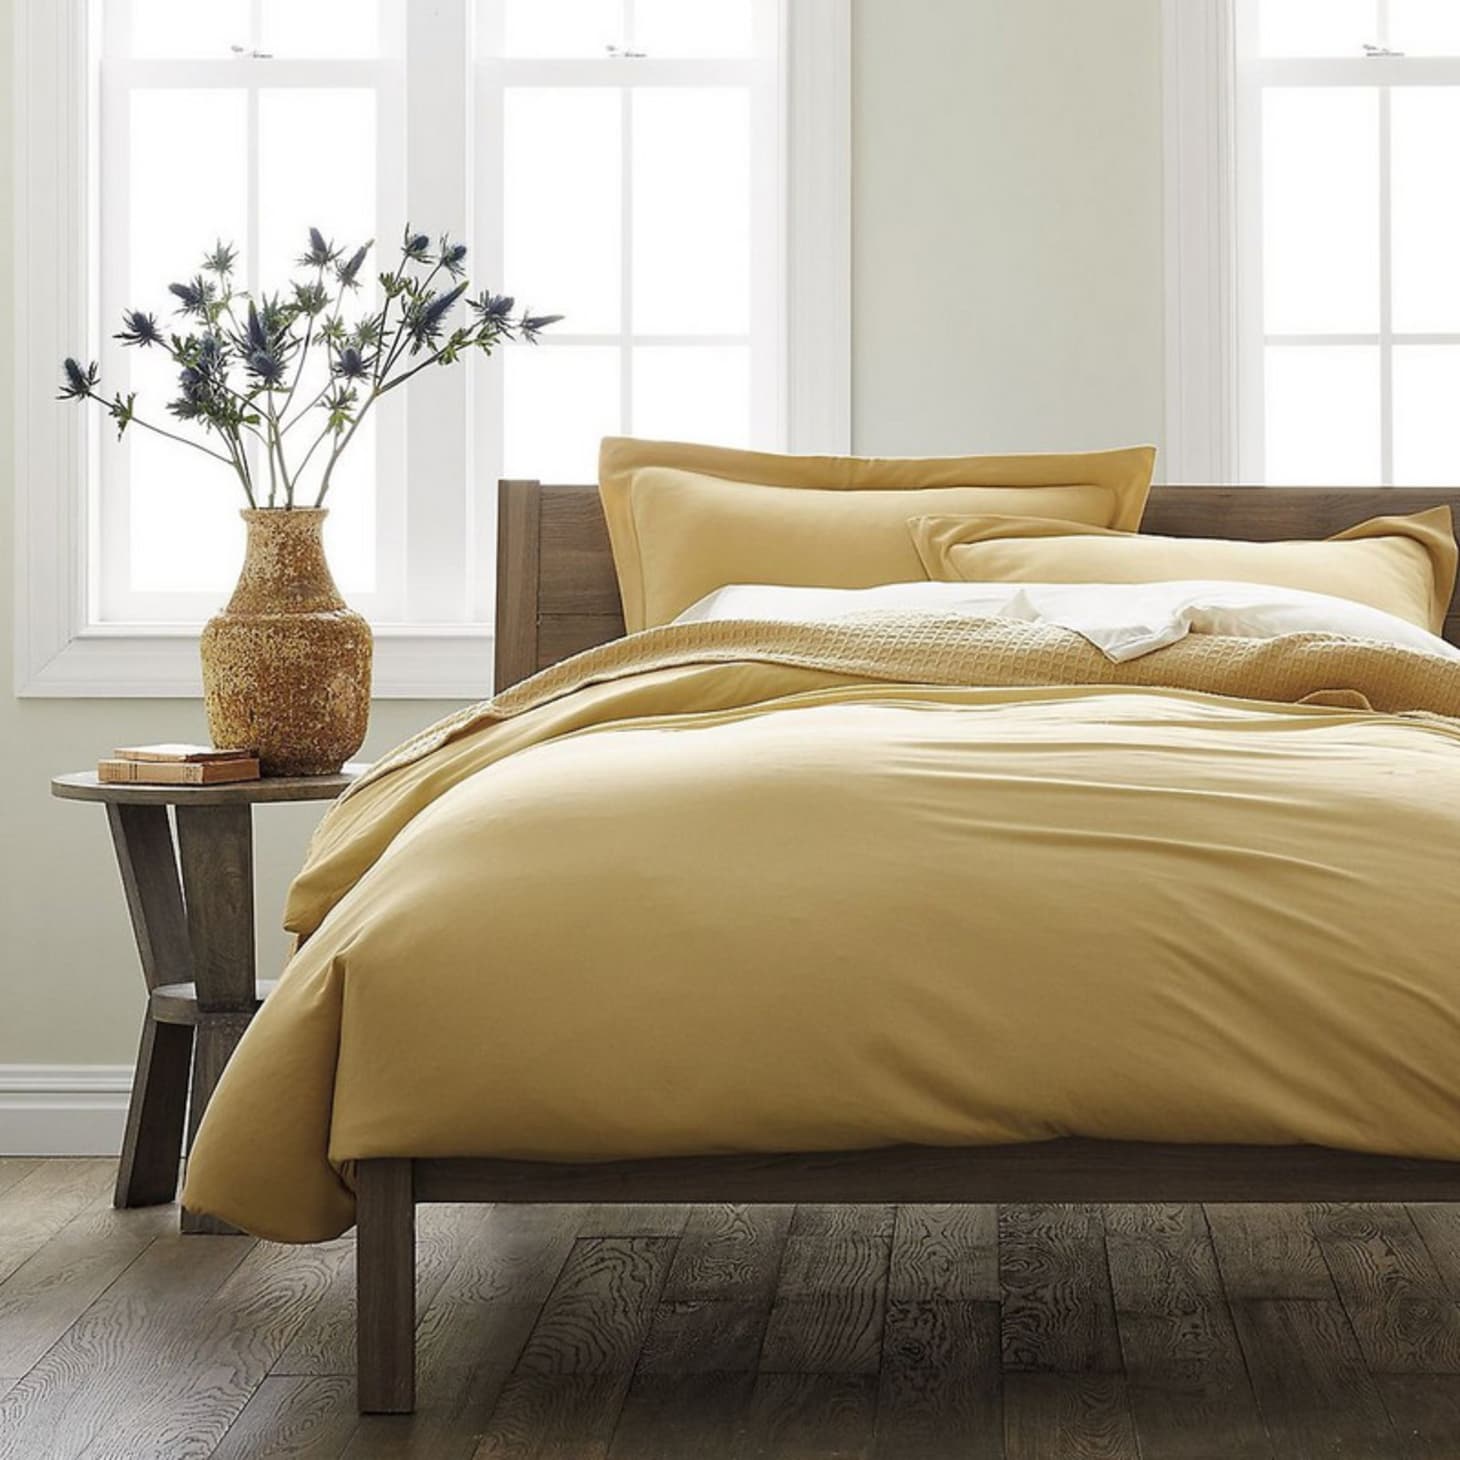 The Best Cotton And Linen Duvet Covers For A Great Night S Sleep